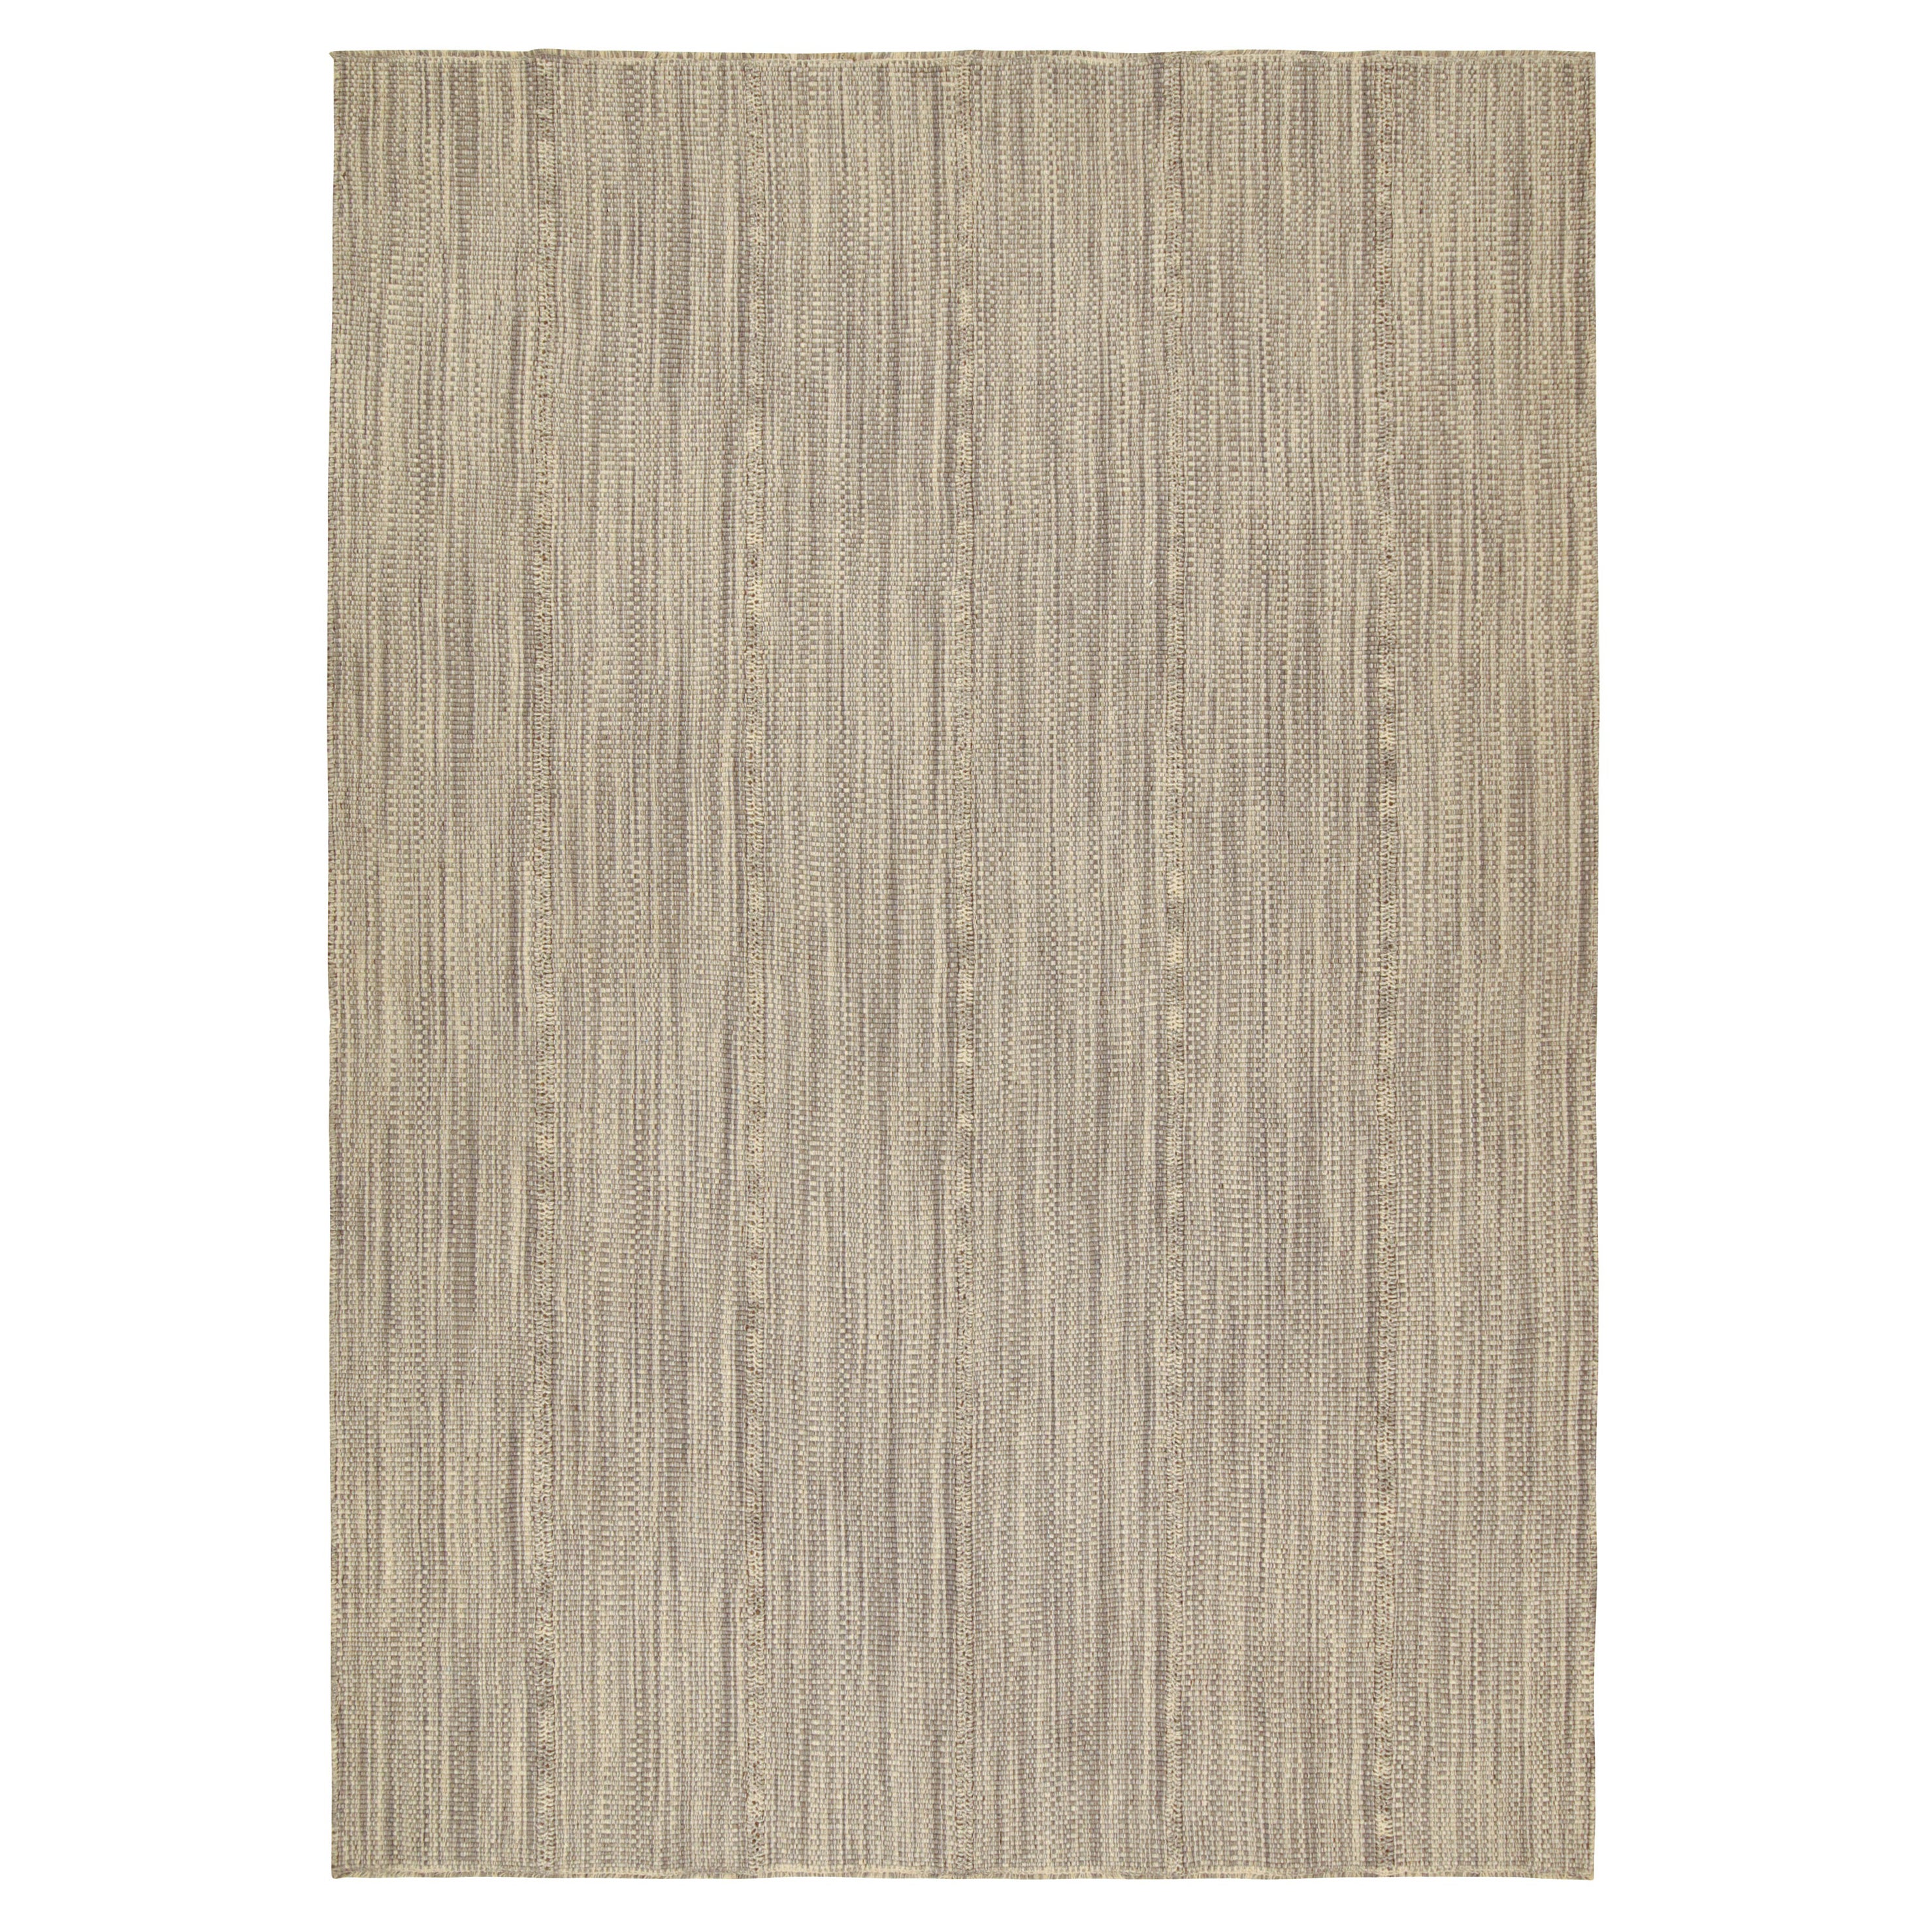 Rug & Kilim’s Contemporary Kilim Rug in Beige-Brown with Gray Accents